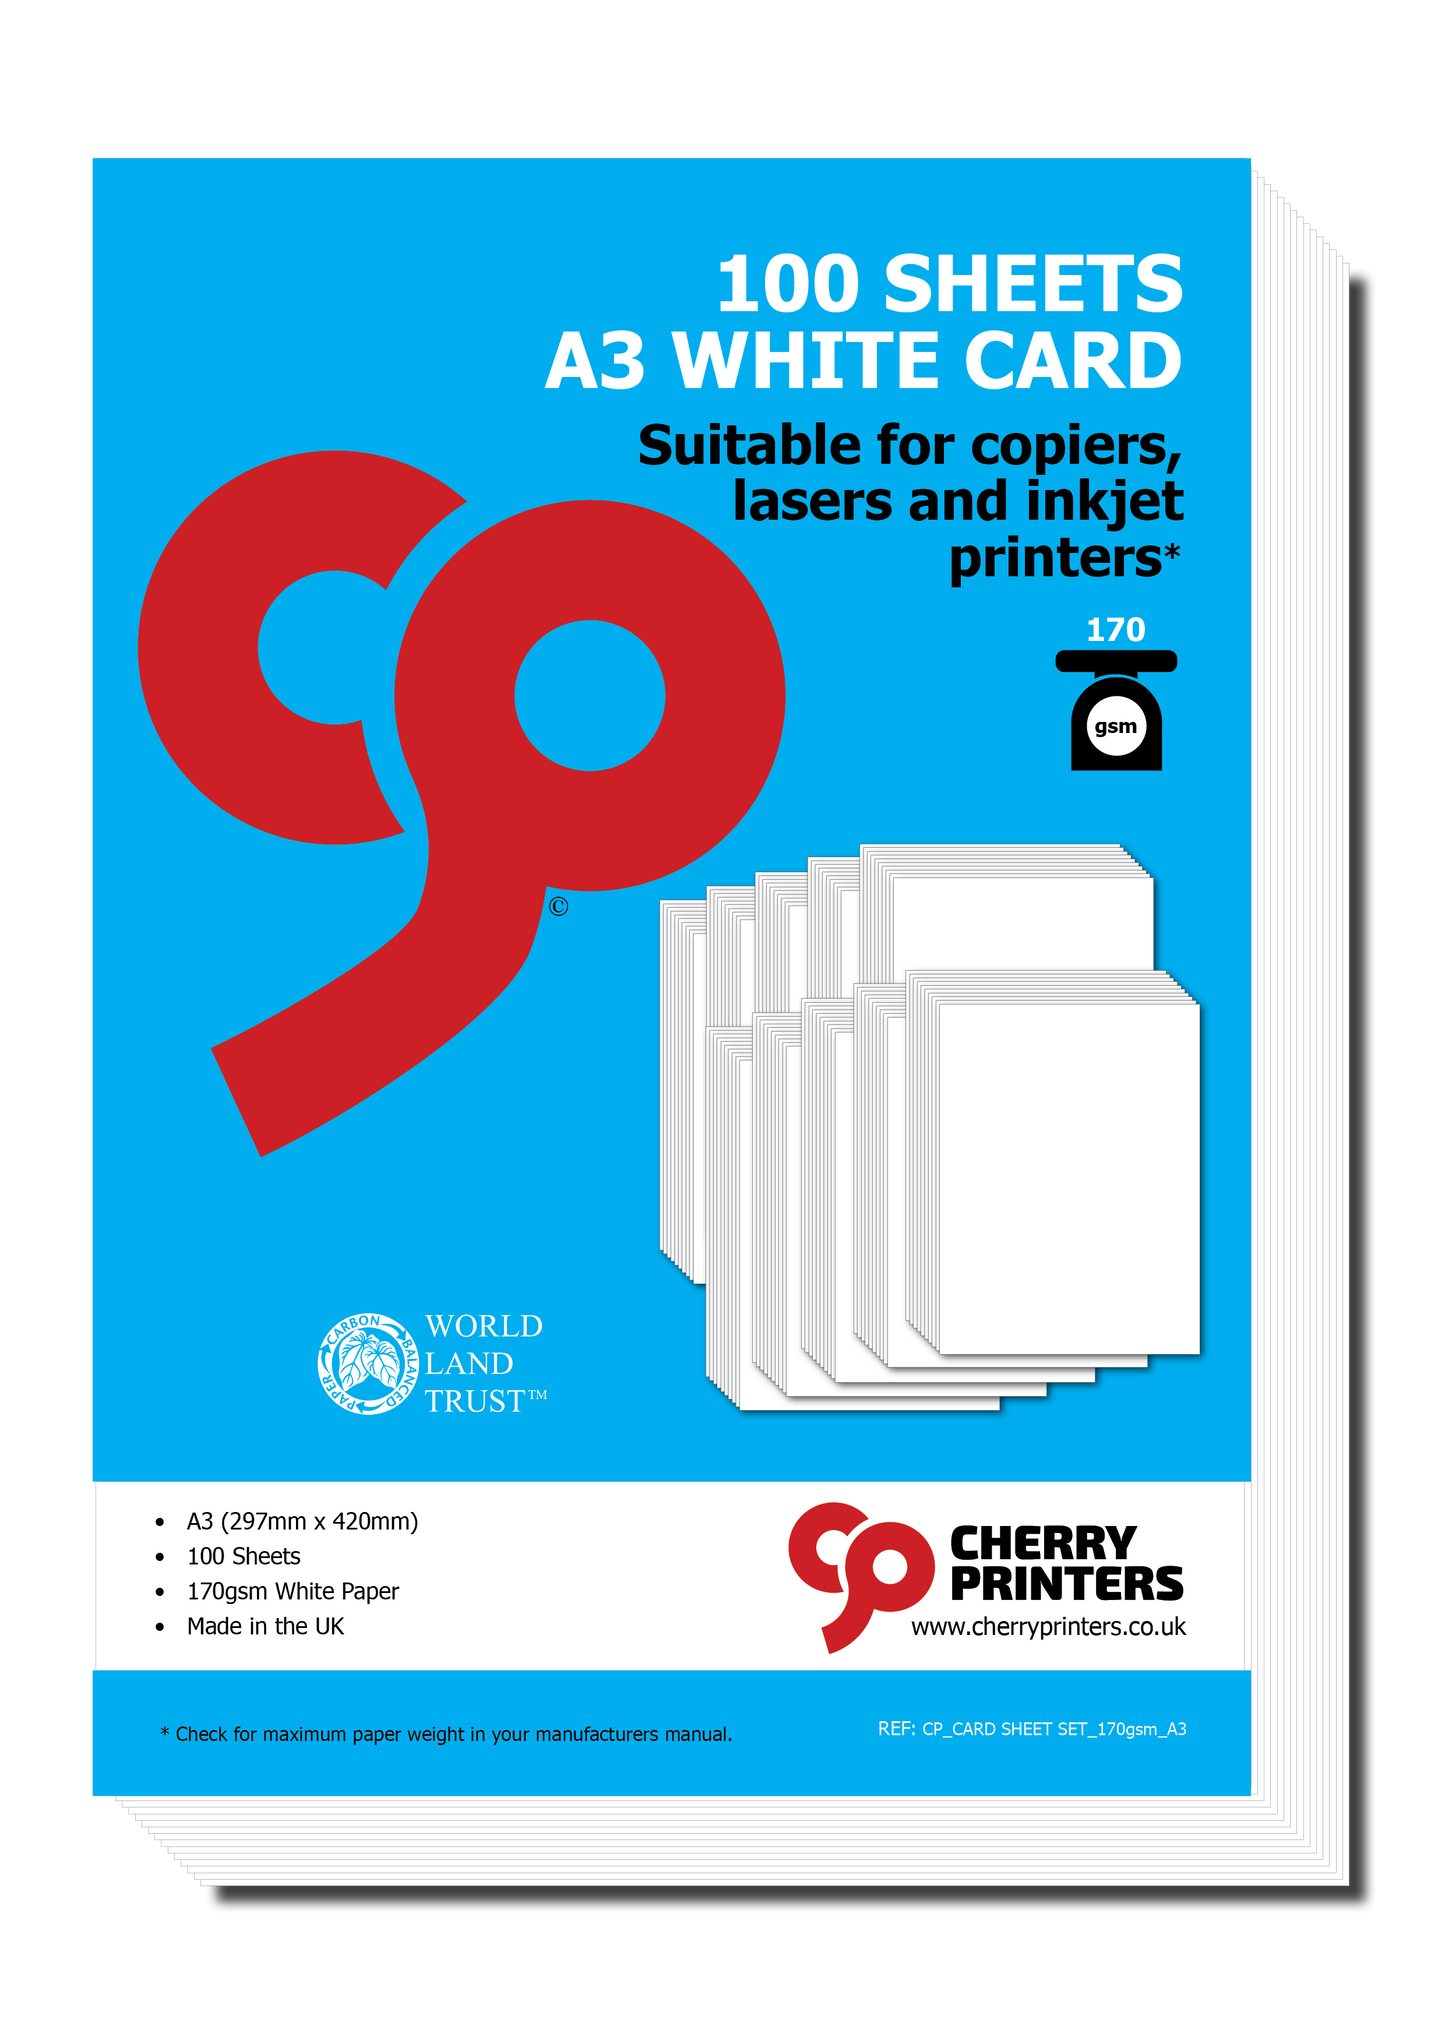 170gsm White Card Suitable for Copiers, Lasers and Inkjet Printers 100 Sheets